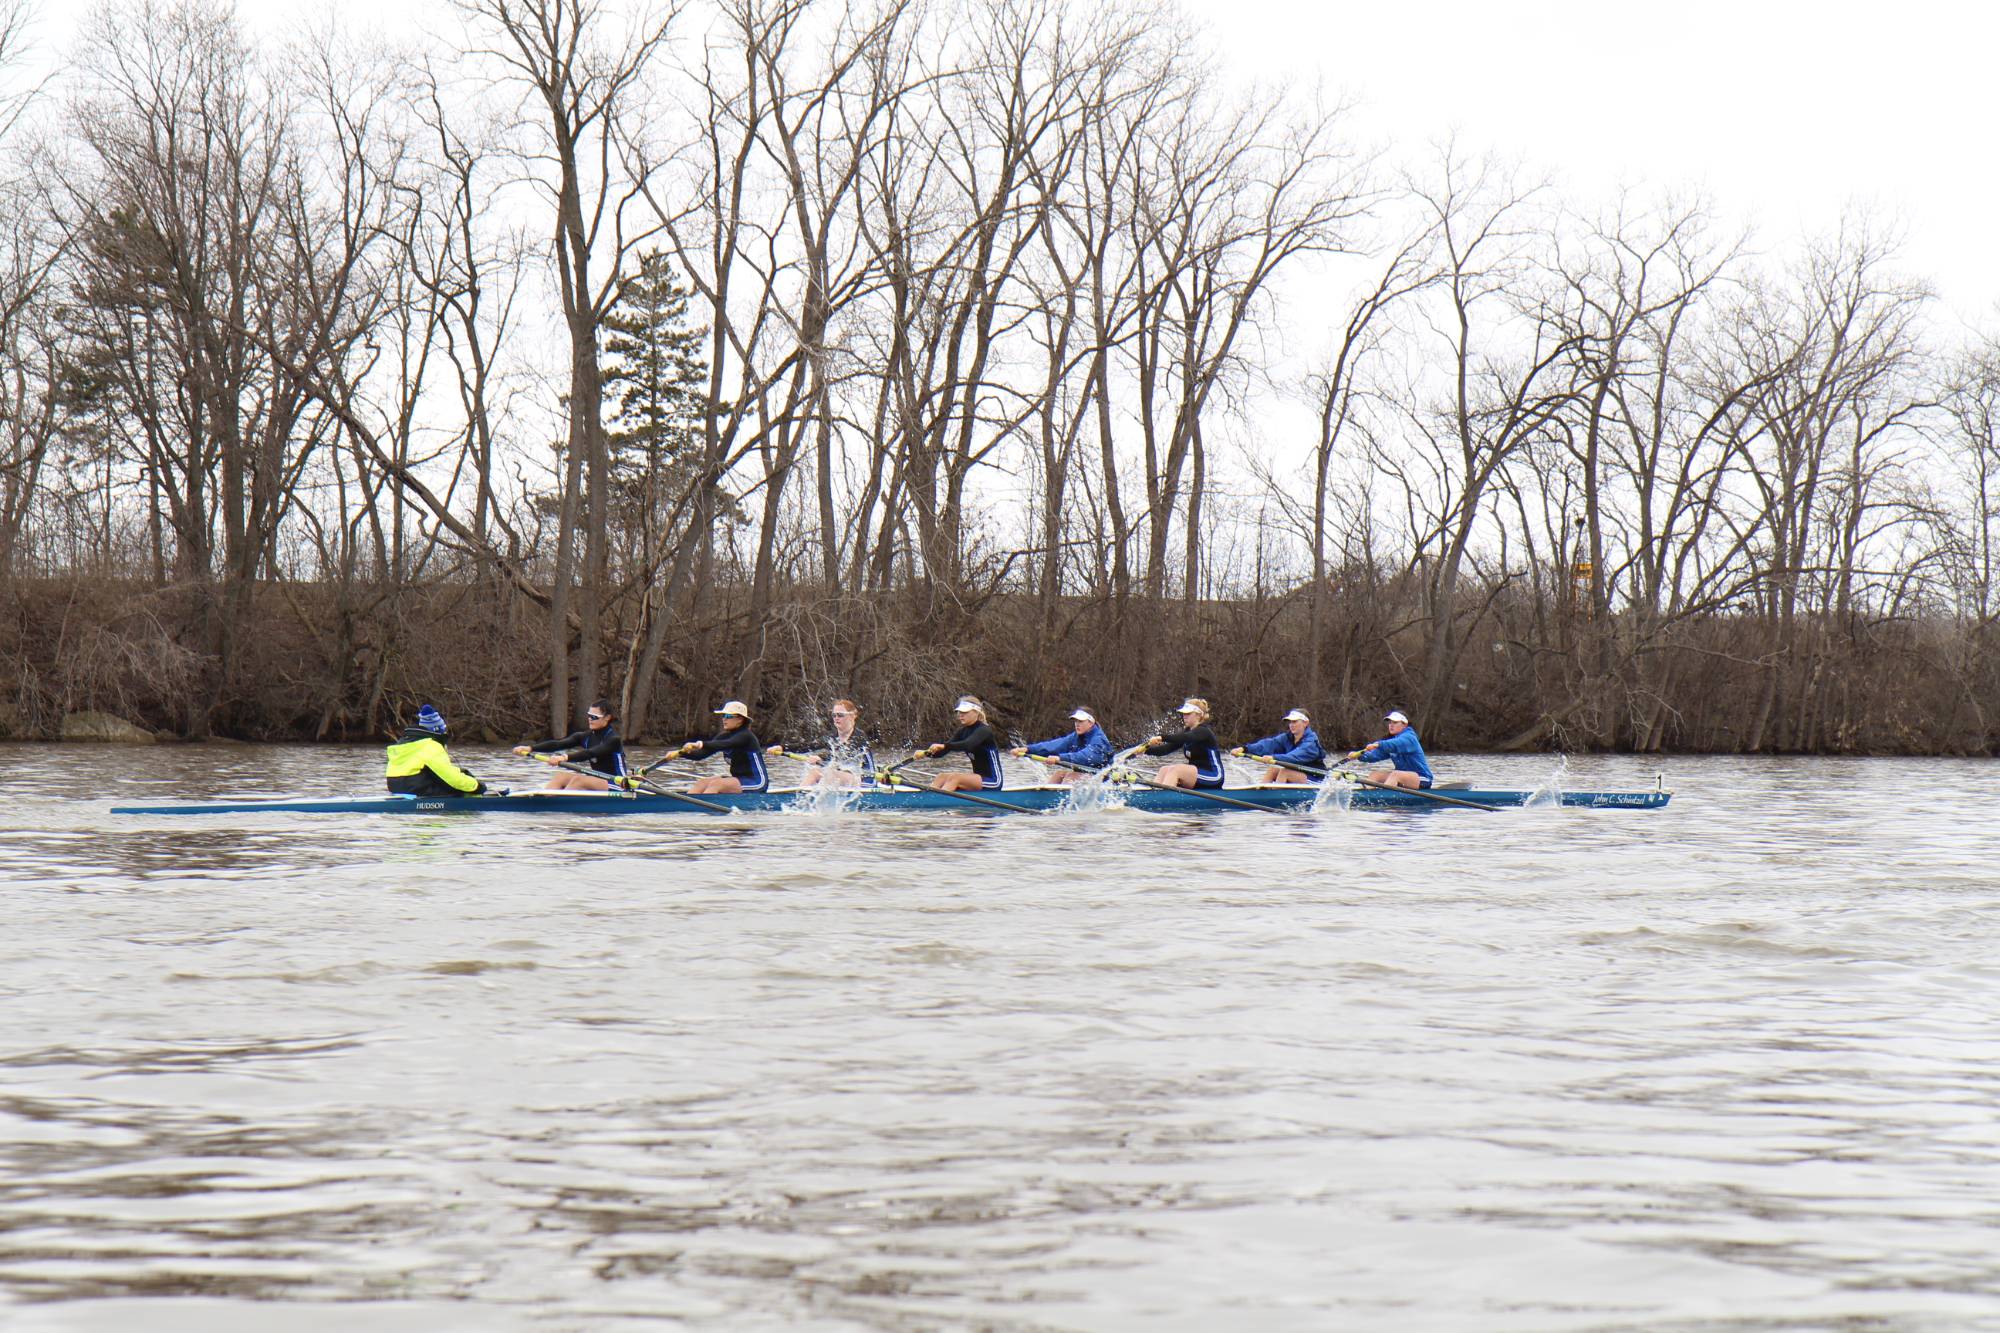 8 womens rowing during an overcast day on a river with trees with no leaves in the background